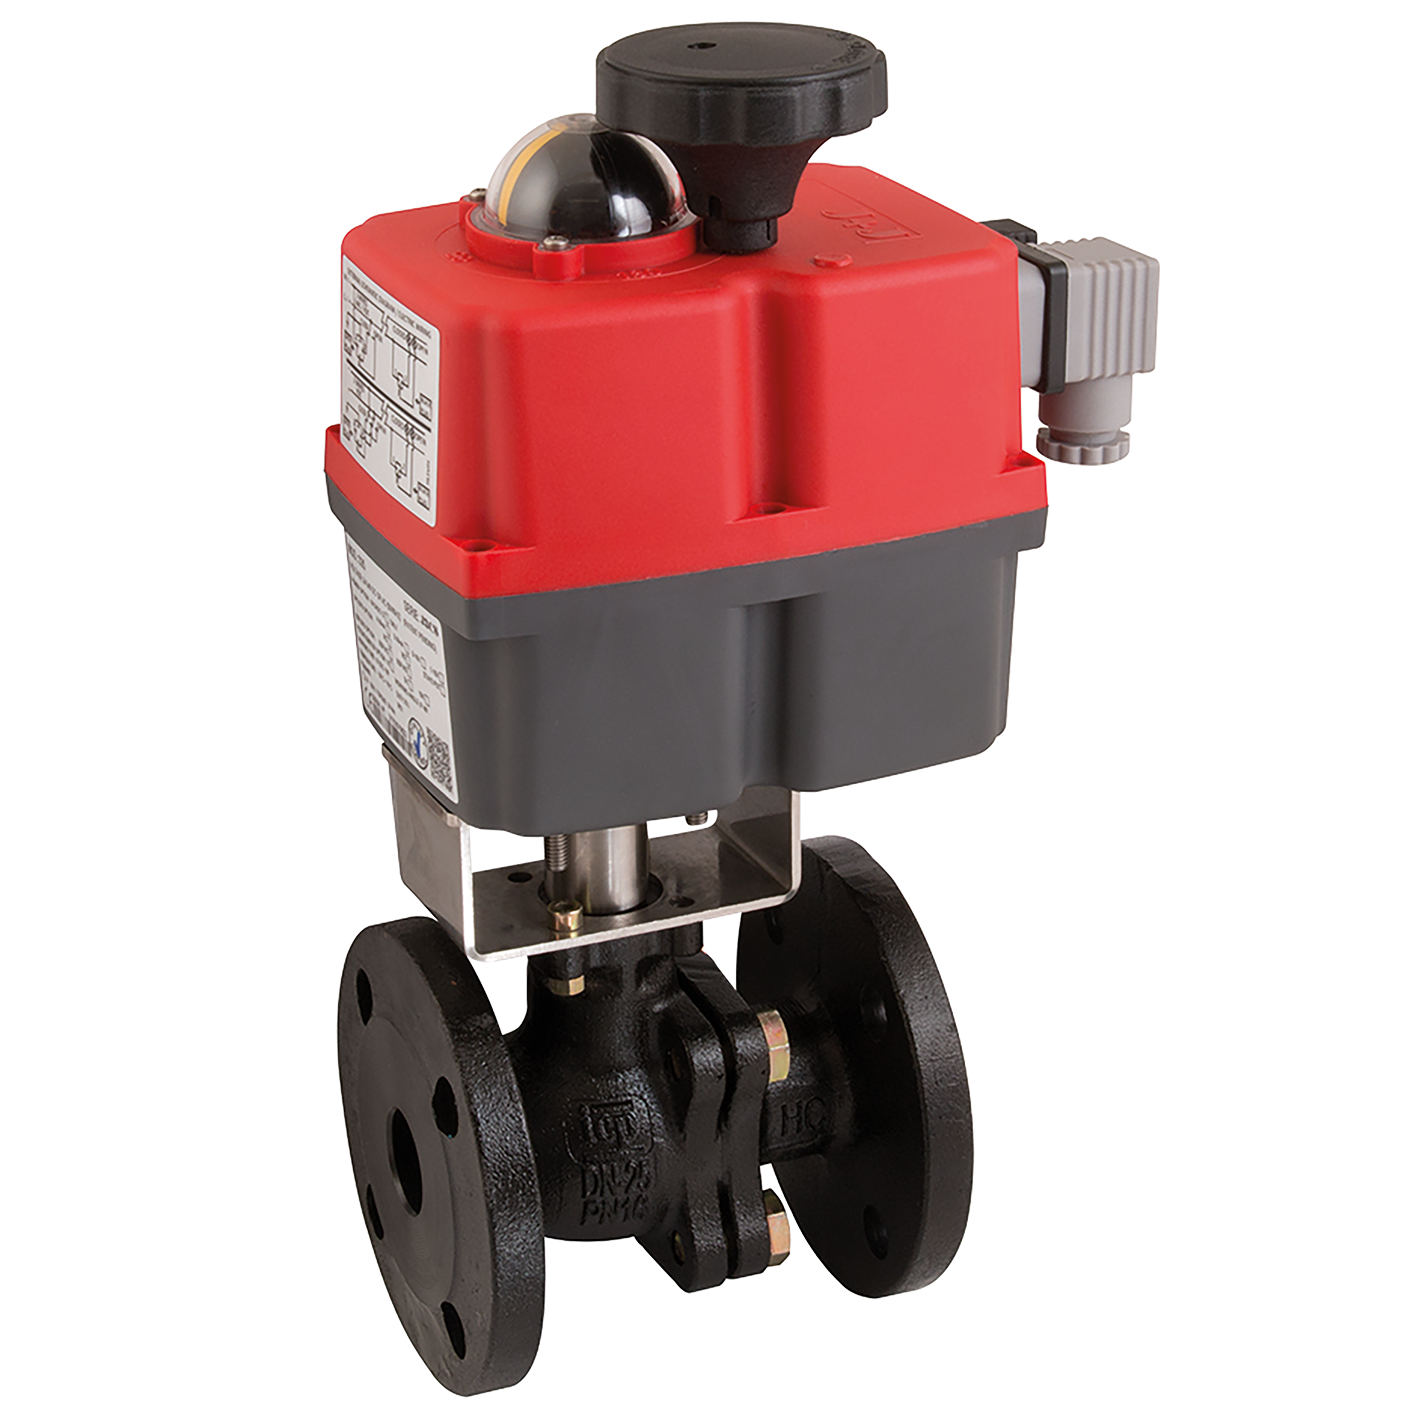 UK's Leading Suppliers of Electric Actuated Cast Iron Ball Valve